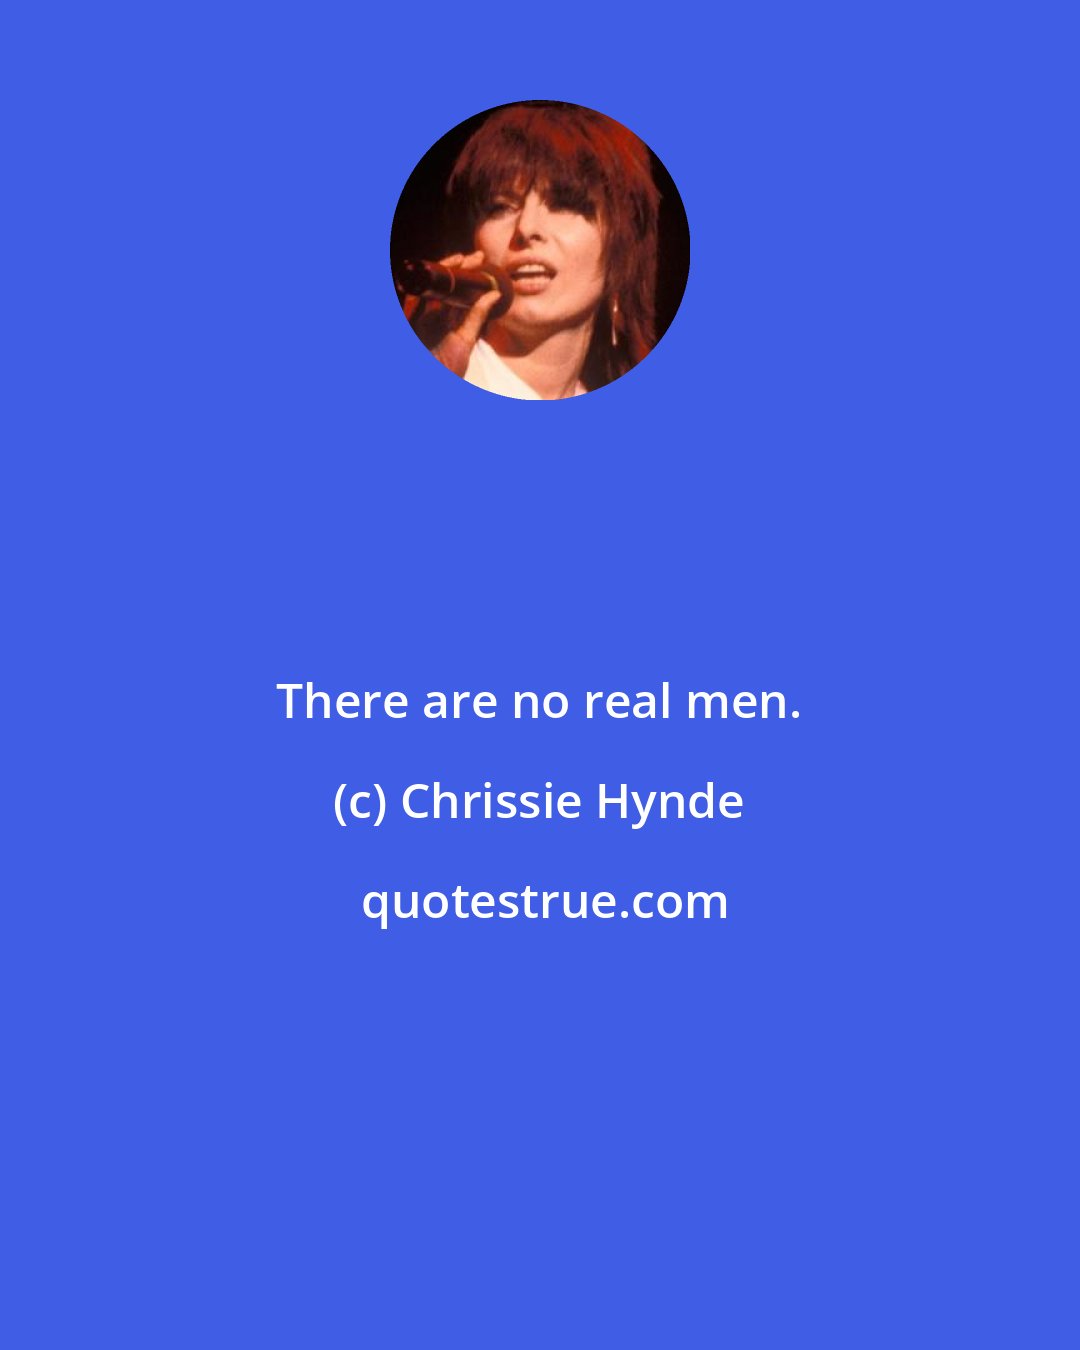 Chrissie Hynde: There are no real men.